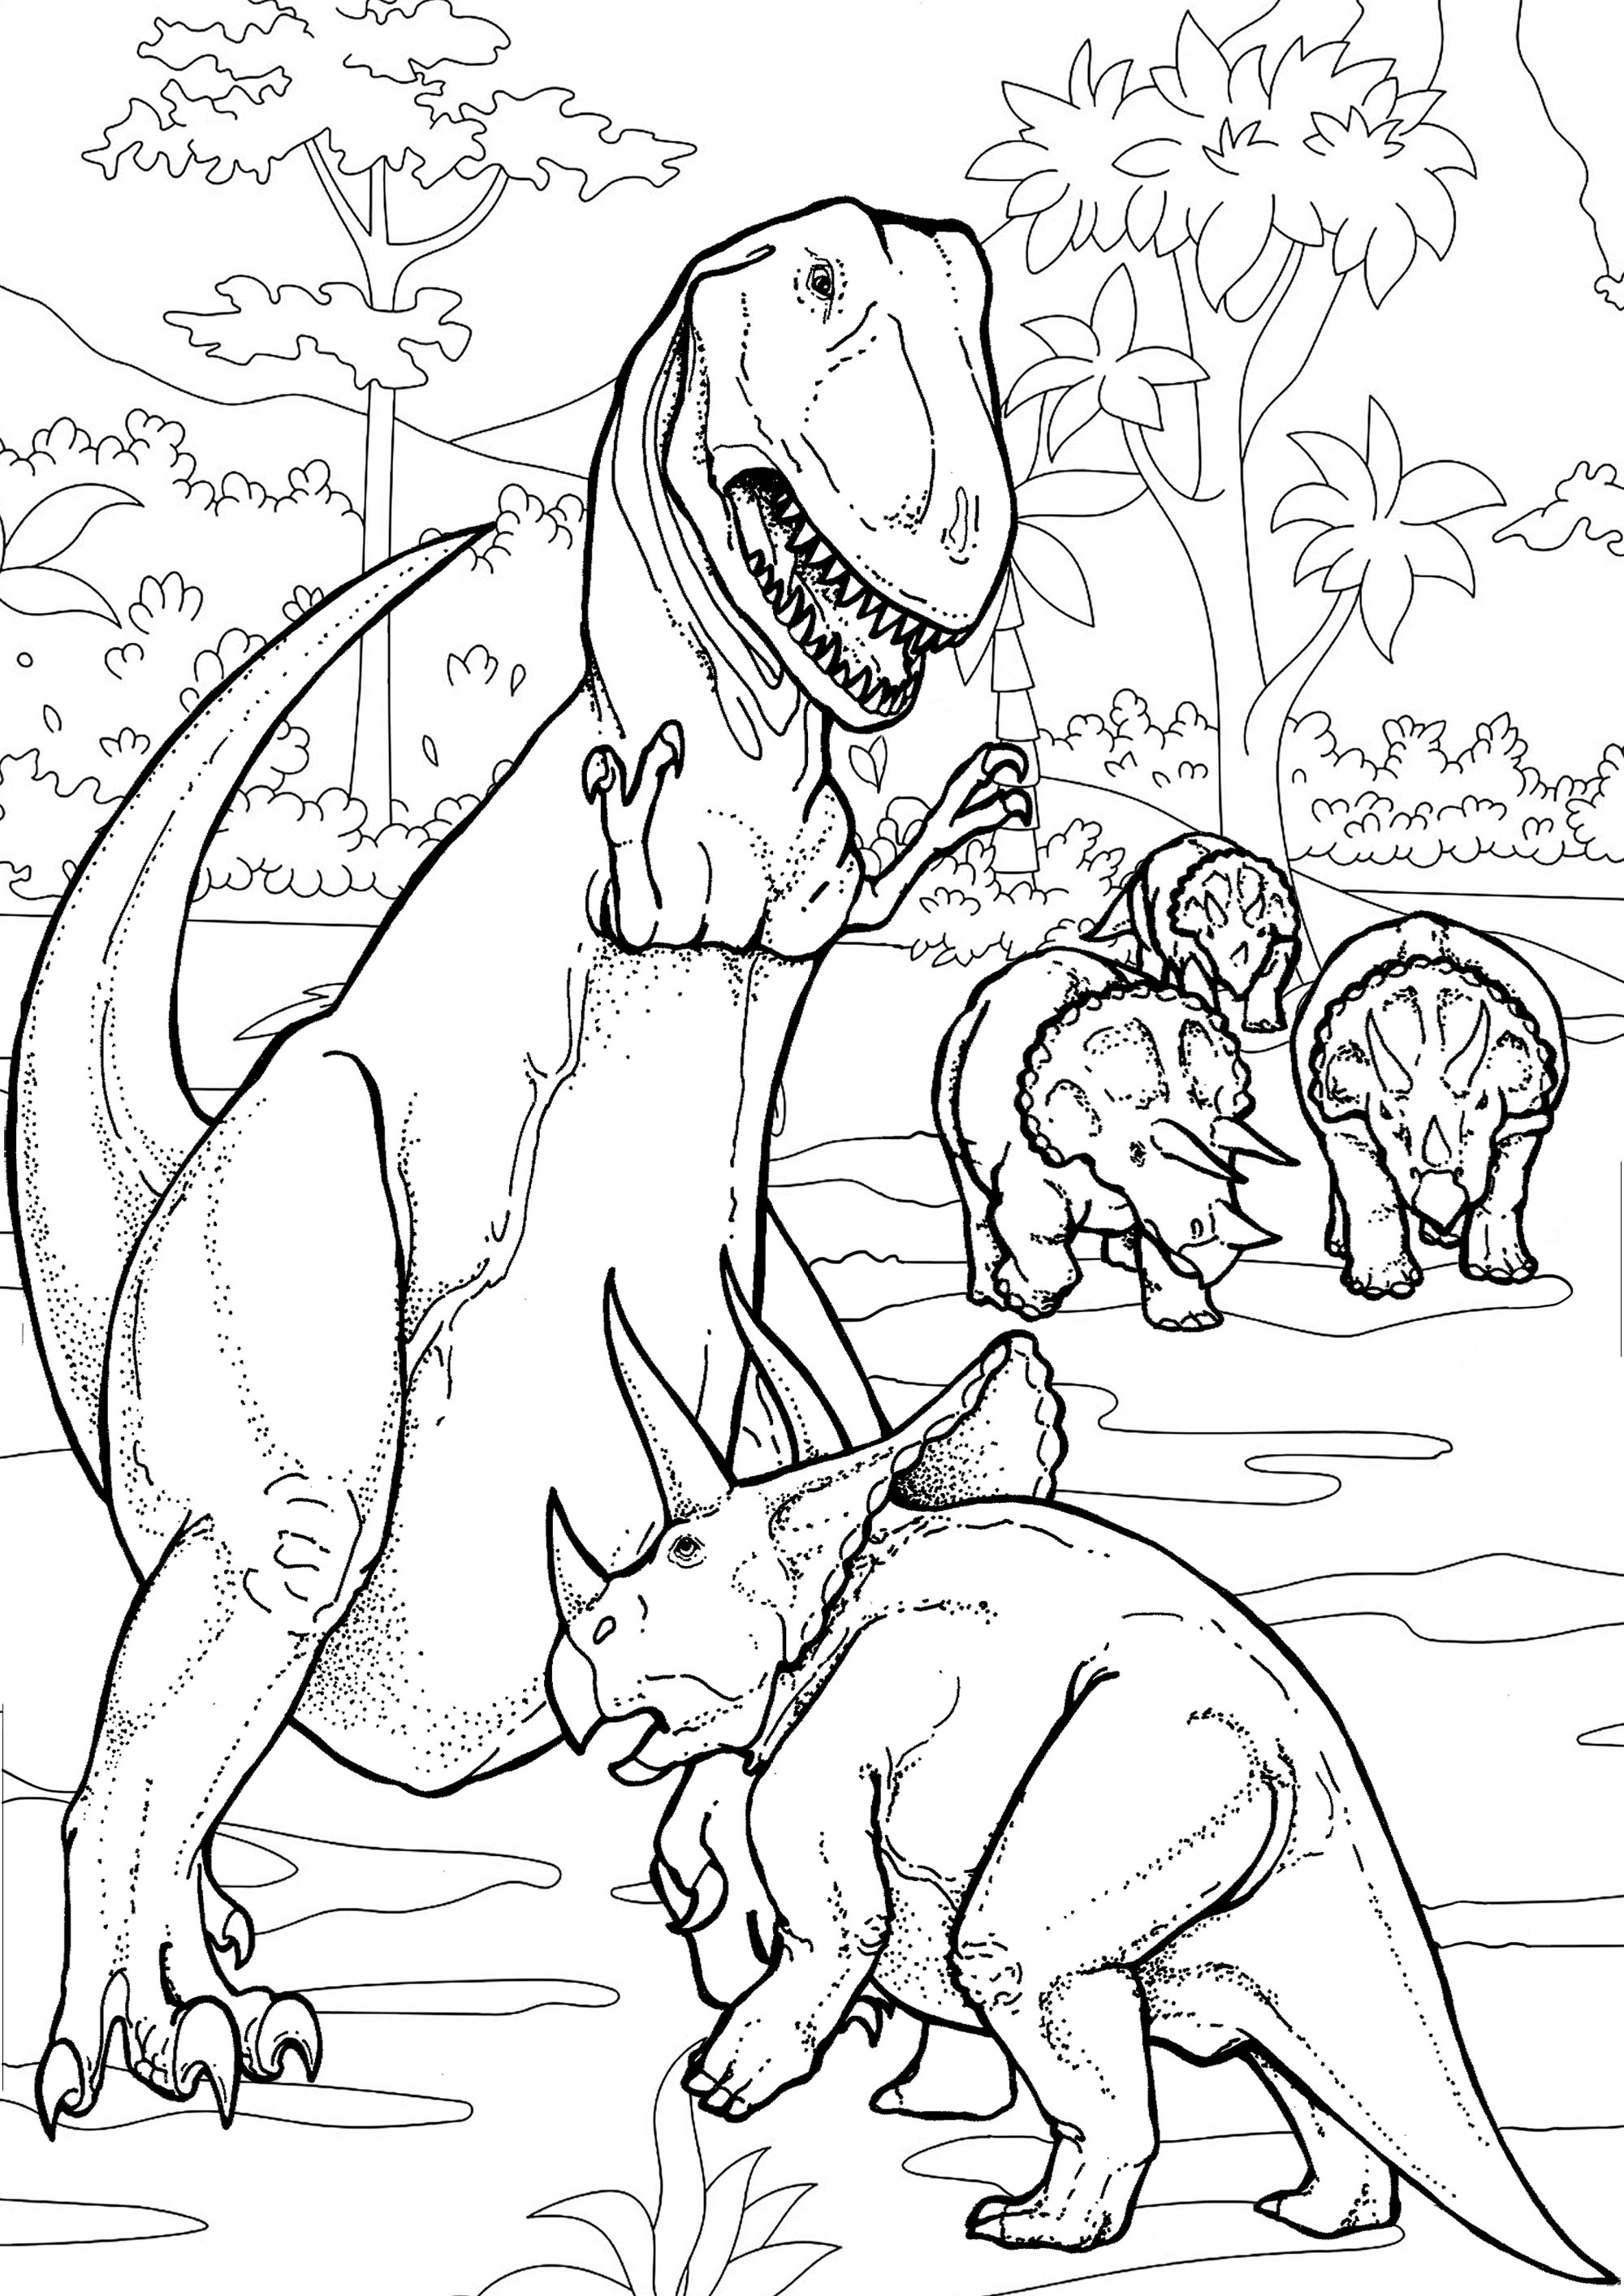 Luta de dinossauros - Dinossauros - Coloring Pages for Adults